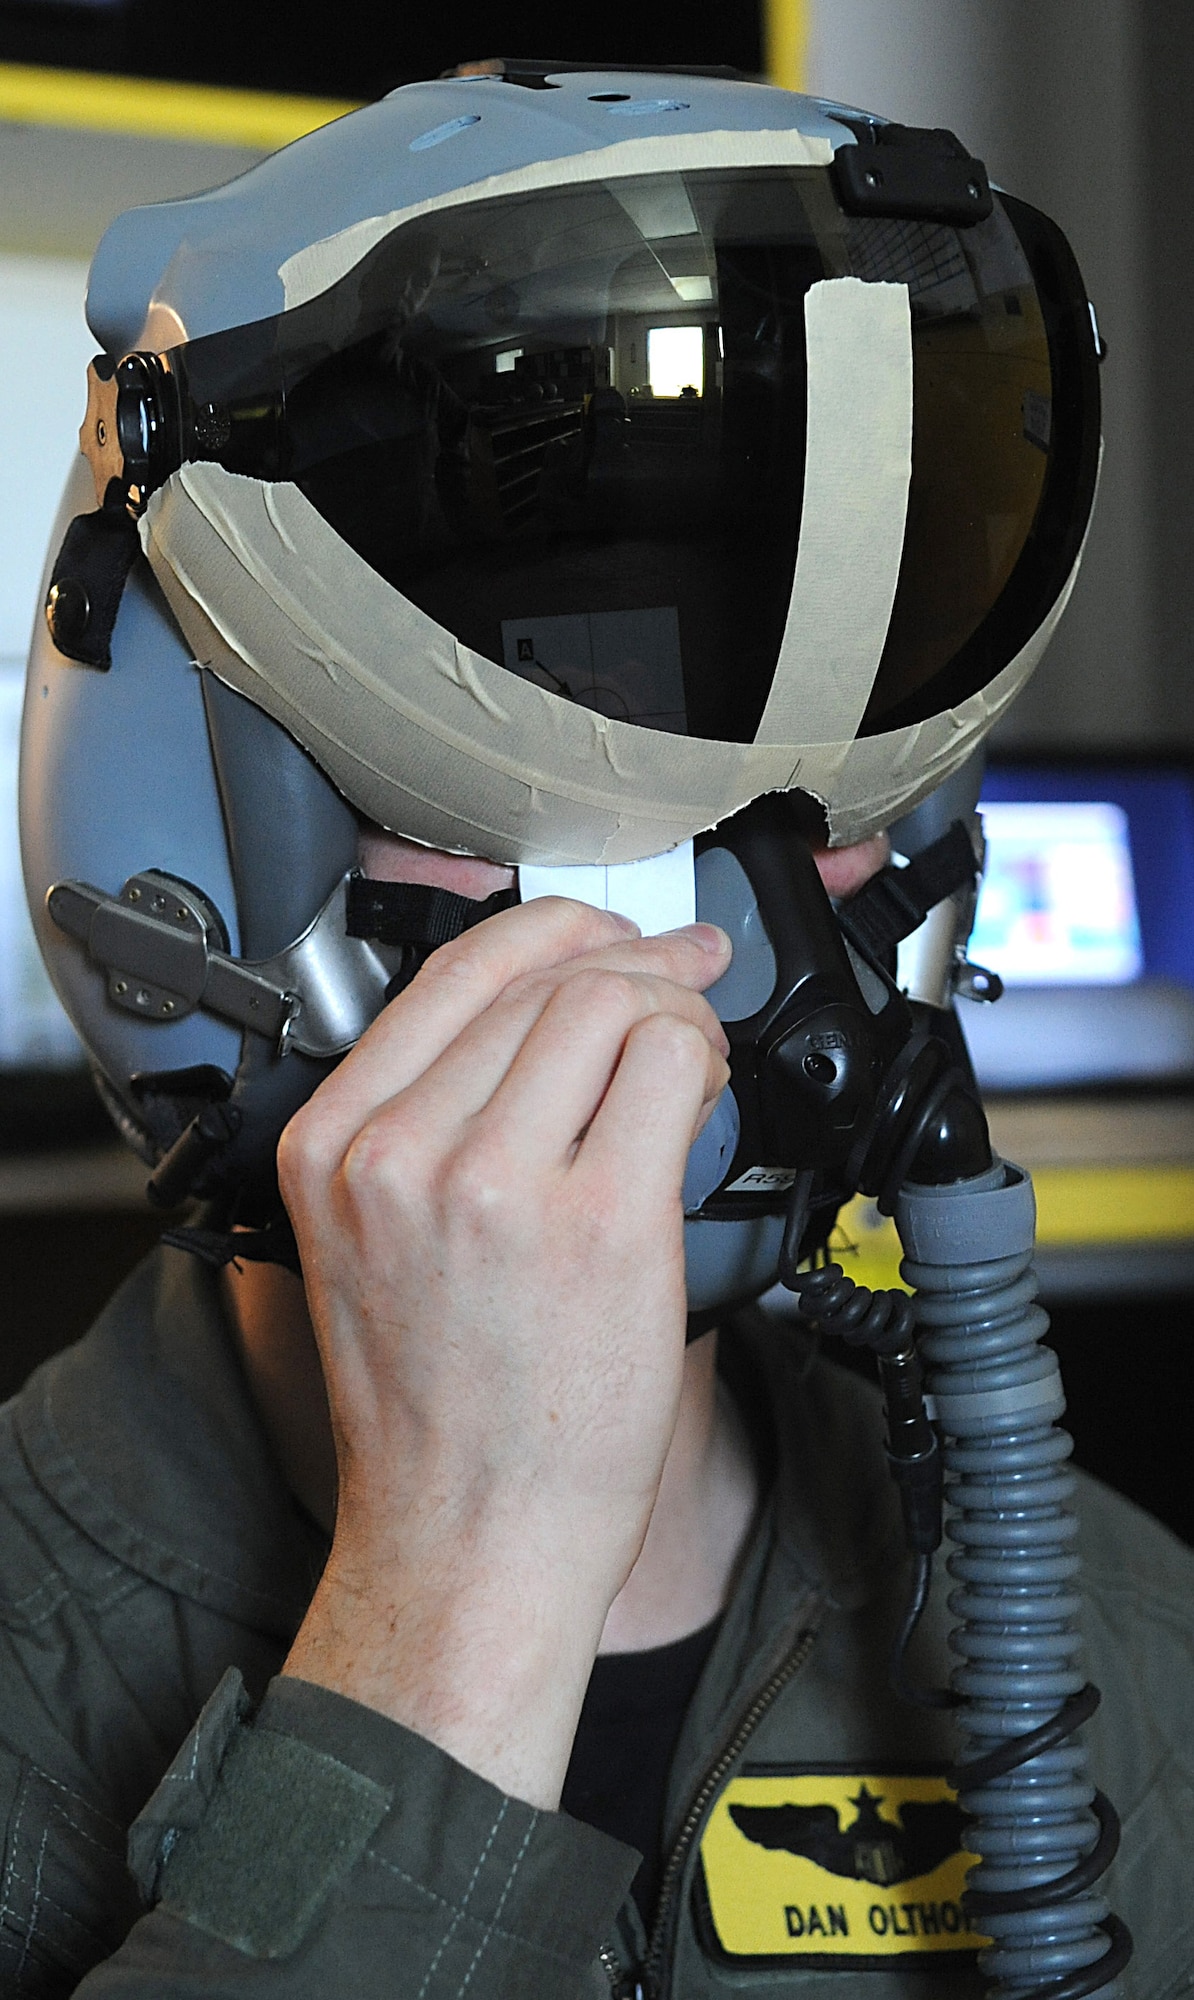 SEYMOUR JOHNSON AIR FORCE BASE, N.C. – Capt. Dan Olthoff completes a test that measures the distance between his pupils while wearing a Joint Helmet-Mounted Cueing System Aug. 9, 2010. Once measured, an image will display directly over the pilot’s pupil on the inside of the visor, highlighting the JHMCS ability to display cueing symbology for navigation, weapons and targeting sensors. Captain Olthoff, 336th Fighter Squadron F-15 E Strike Eagle pilot, is from Atlanta. (U.S. Air Force photo/Senior Airman Makenzie Lang)